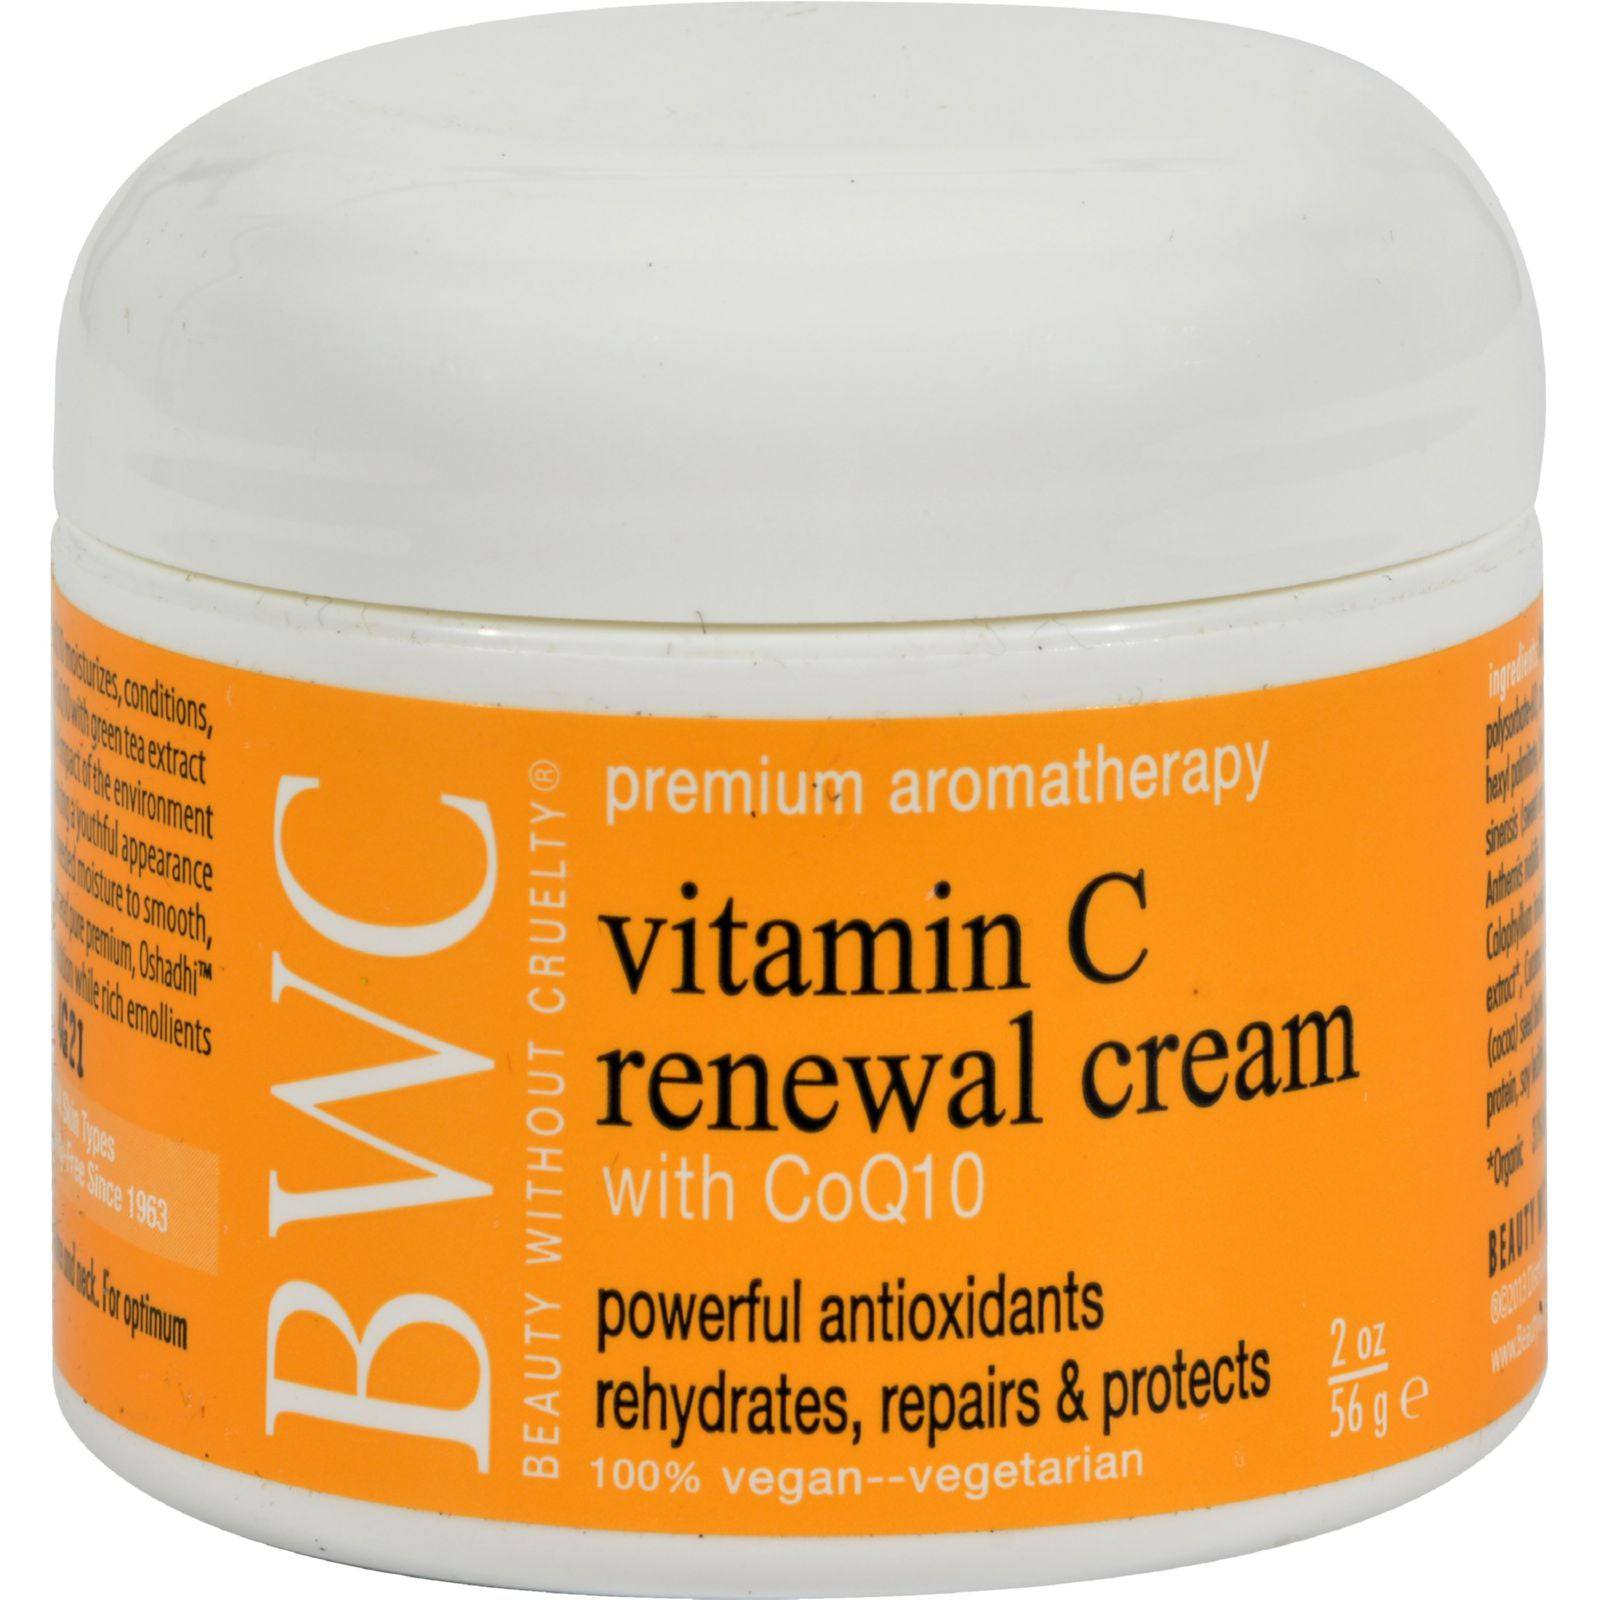 Buy Beauty Without Cruelty Renewal Cream Vitamin C With Coq10 - 2 Oz  at OnlyNaturals.us